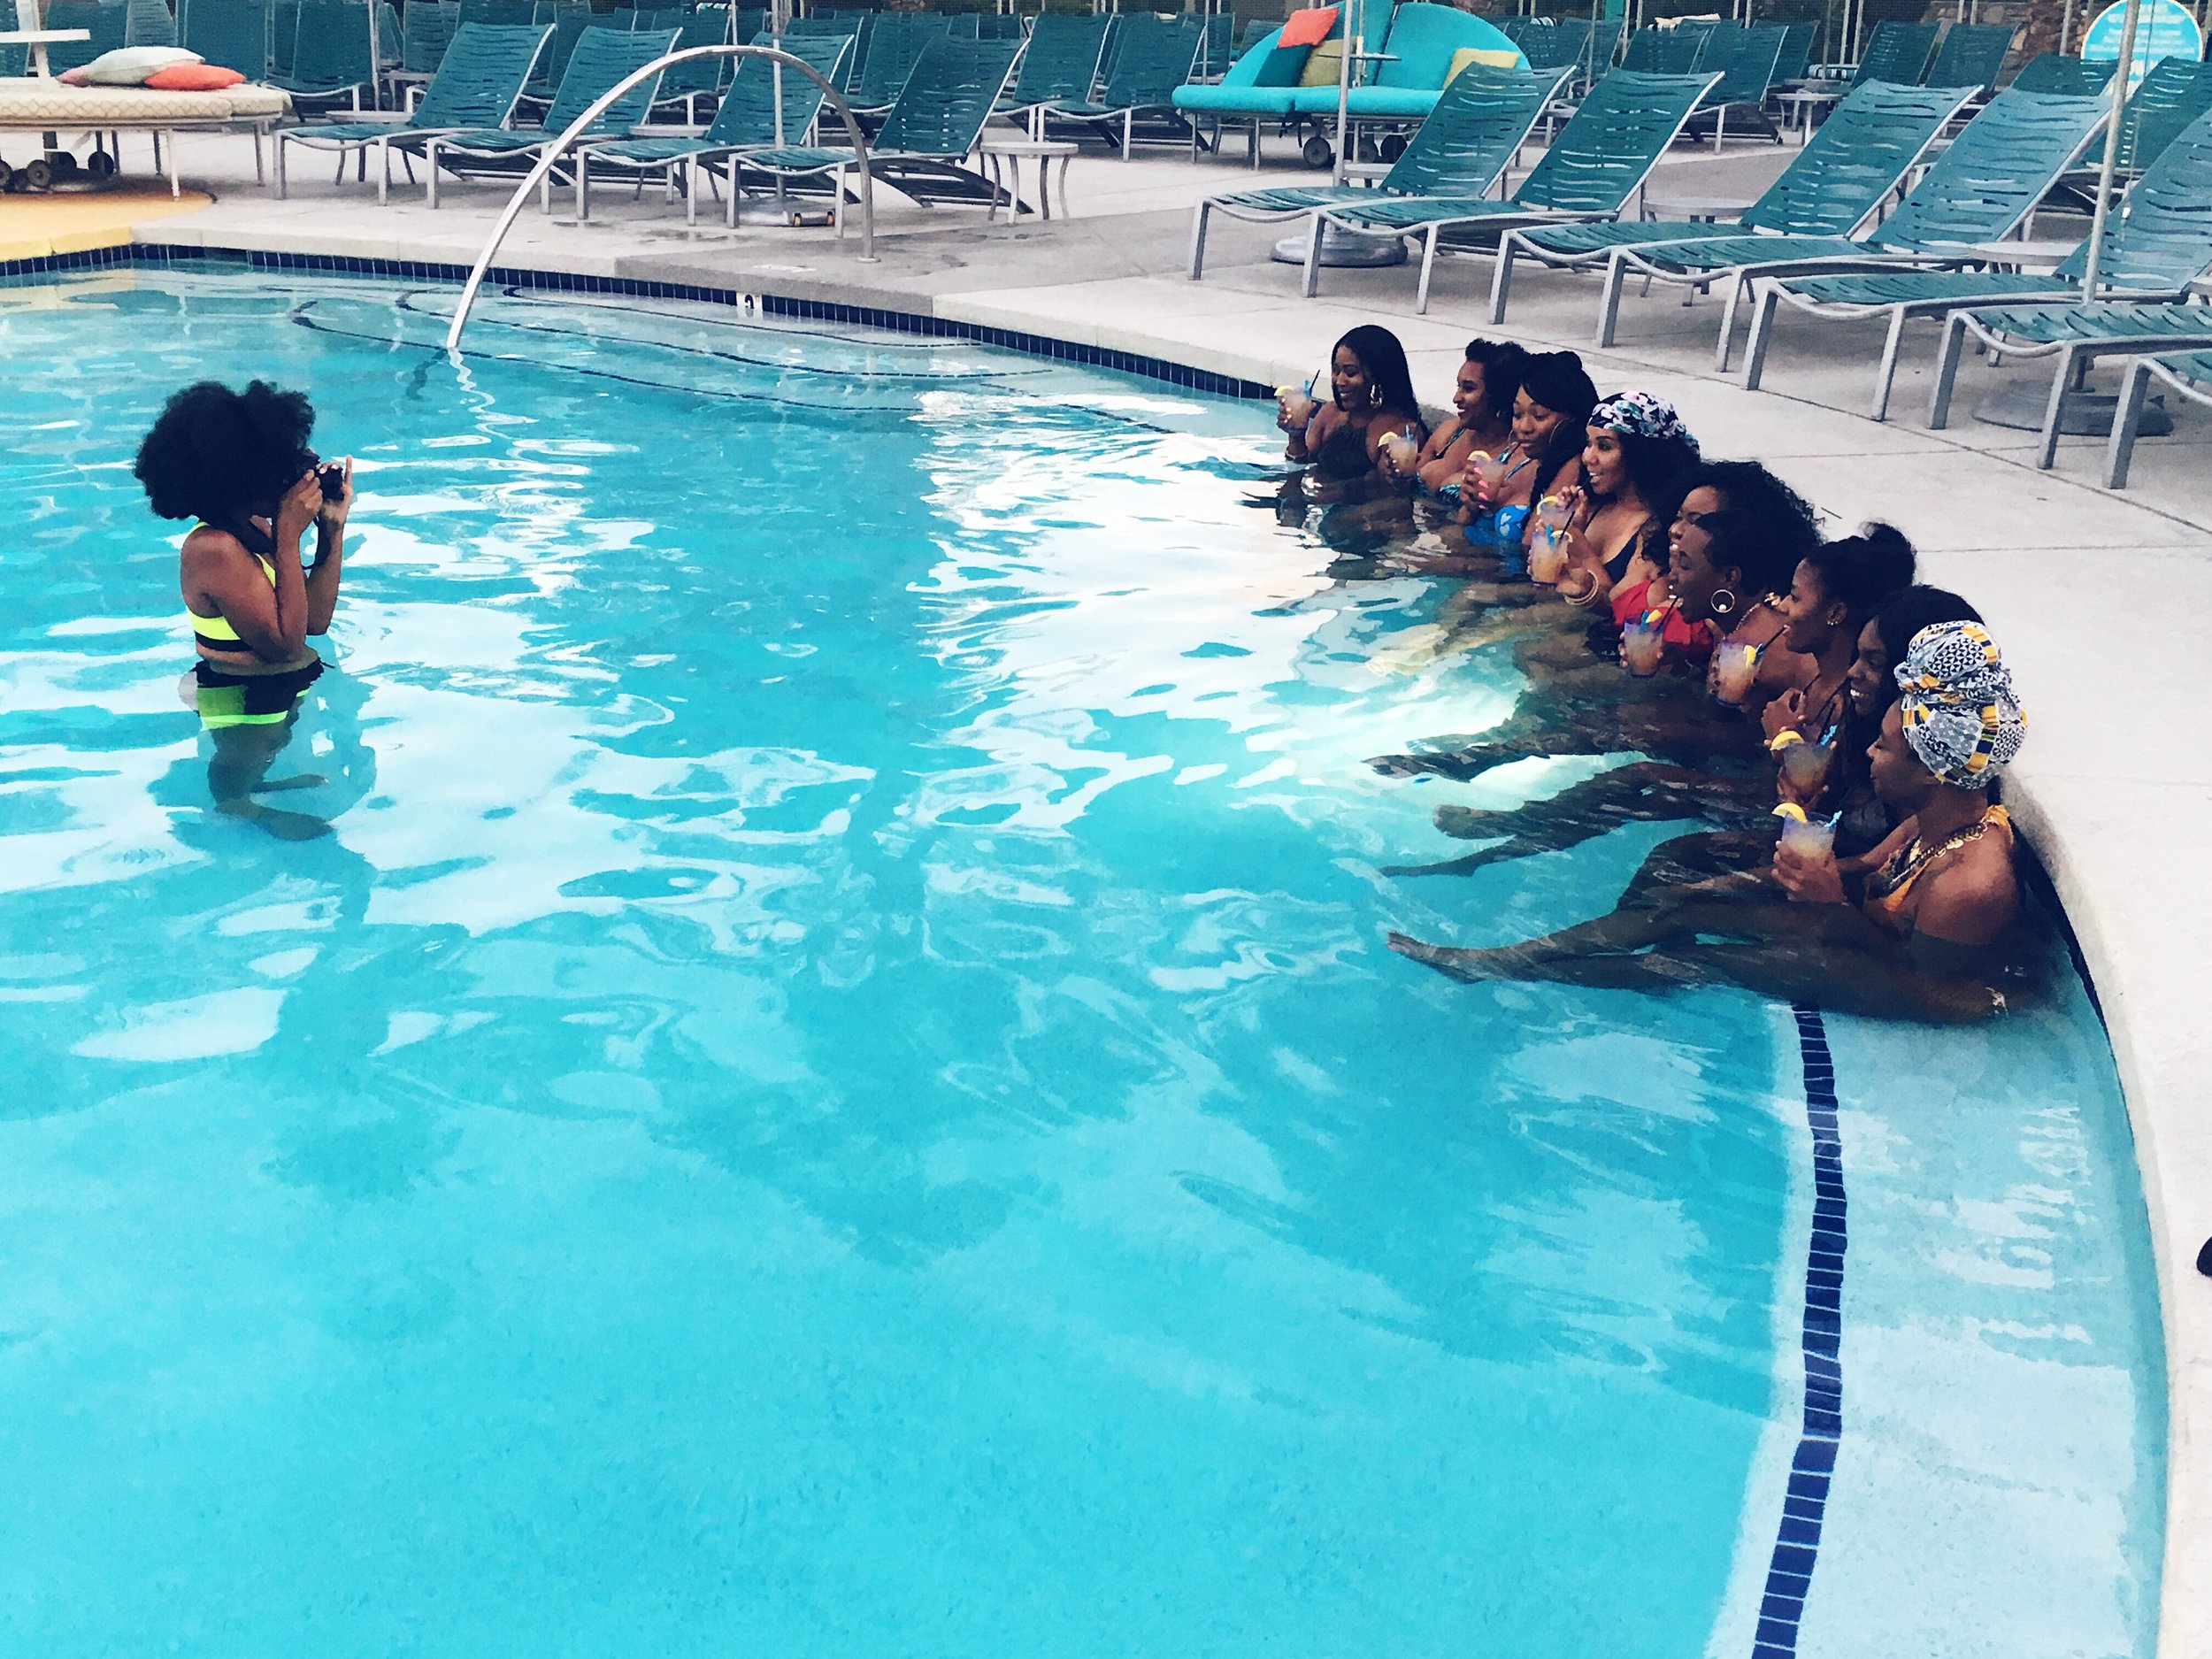 Black Girl Thrive behind the scenes #IssaPoolPartyPhx commerical shoot